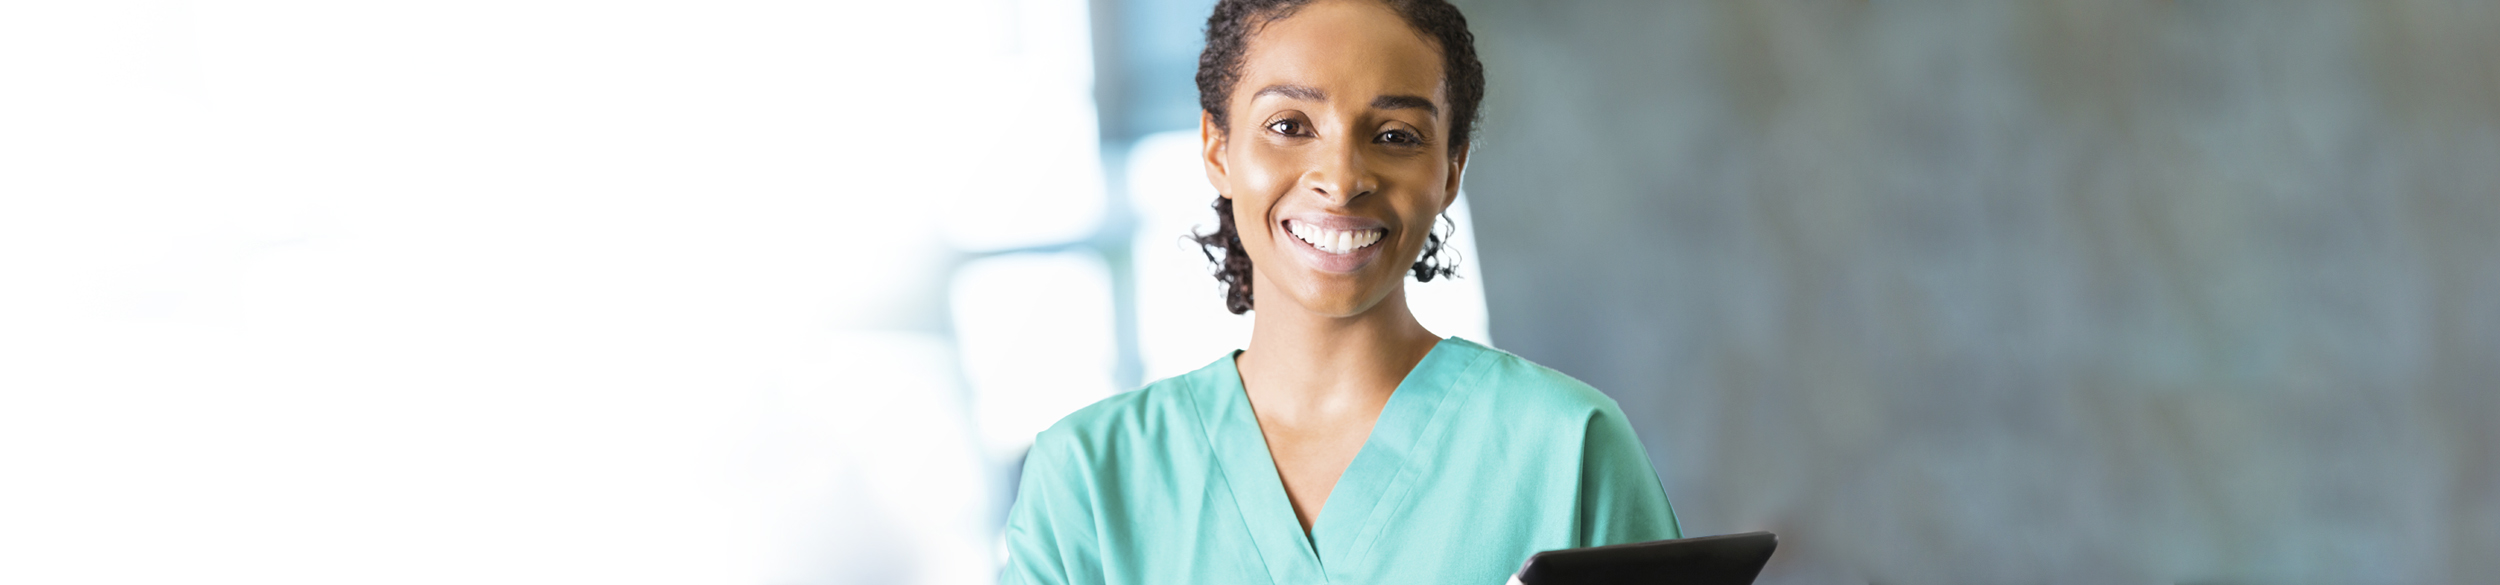 Medical Assistant smiling and holding a clip board